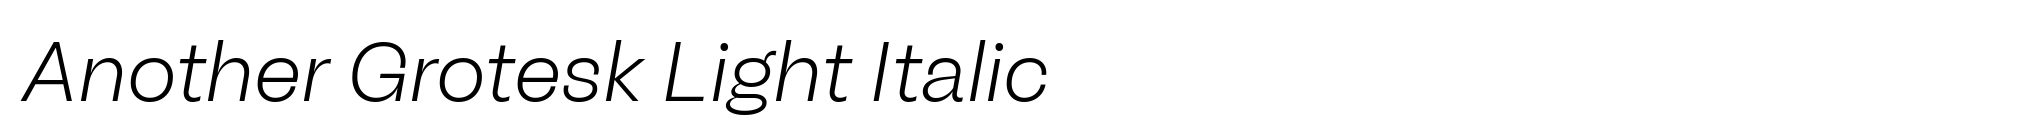 Another Grotesk Light Italic image